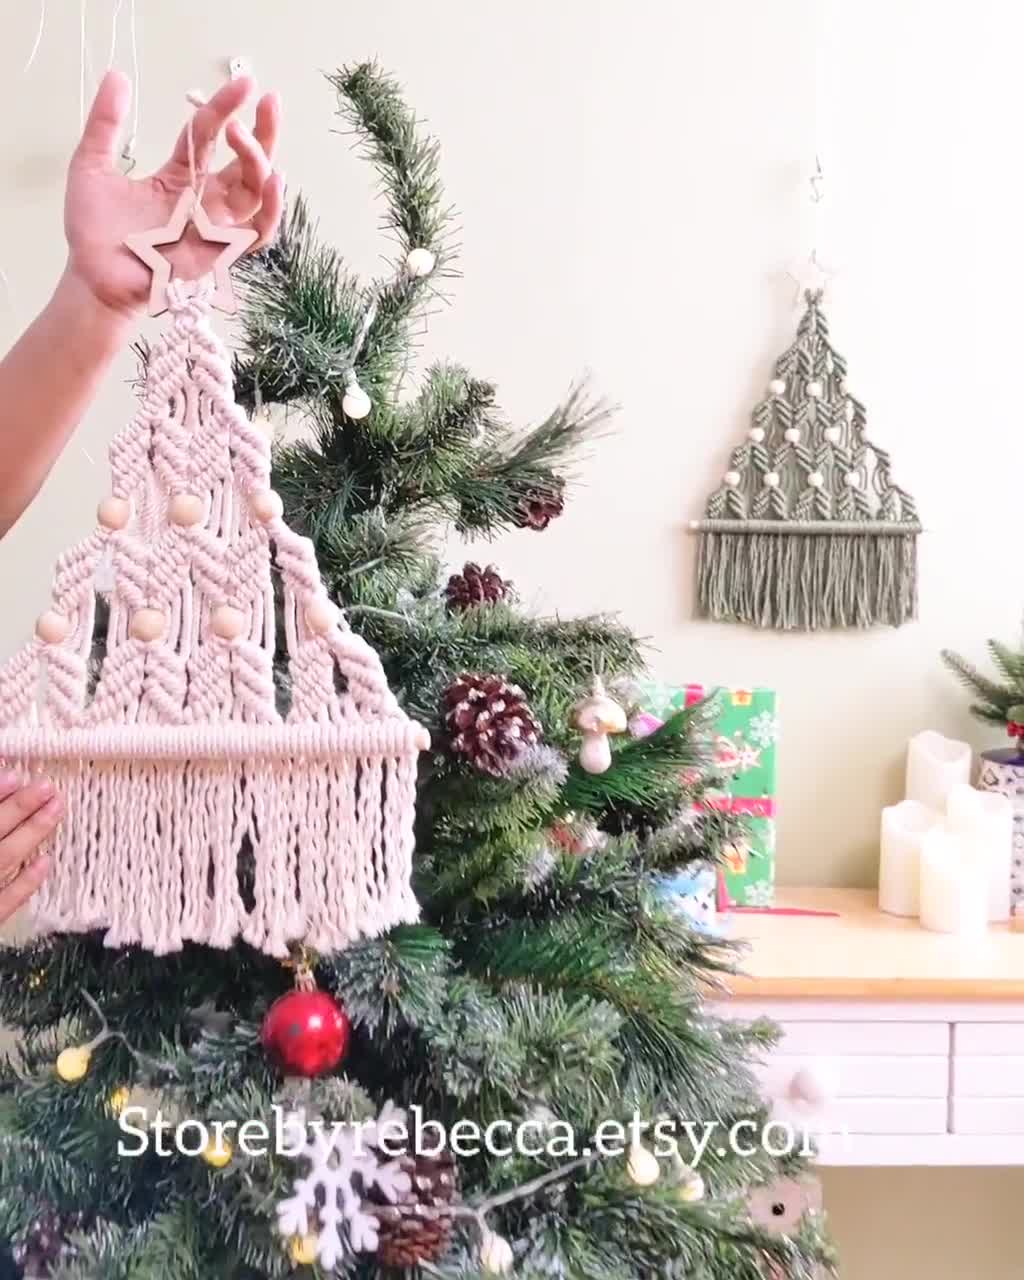 Wrapping Paper Christmas Trees - Let's Craft with ModernMom - 12 Days of  Christmas (Day 3) 